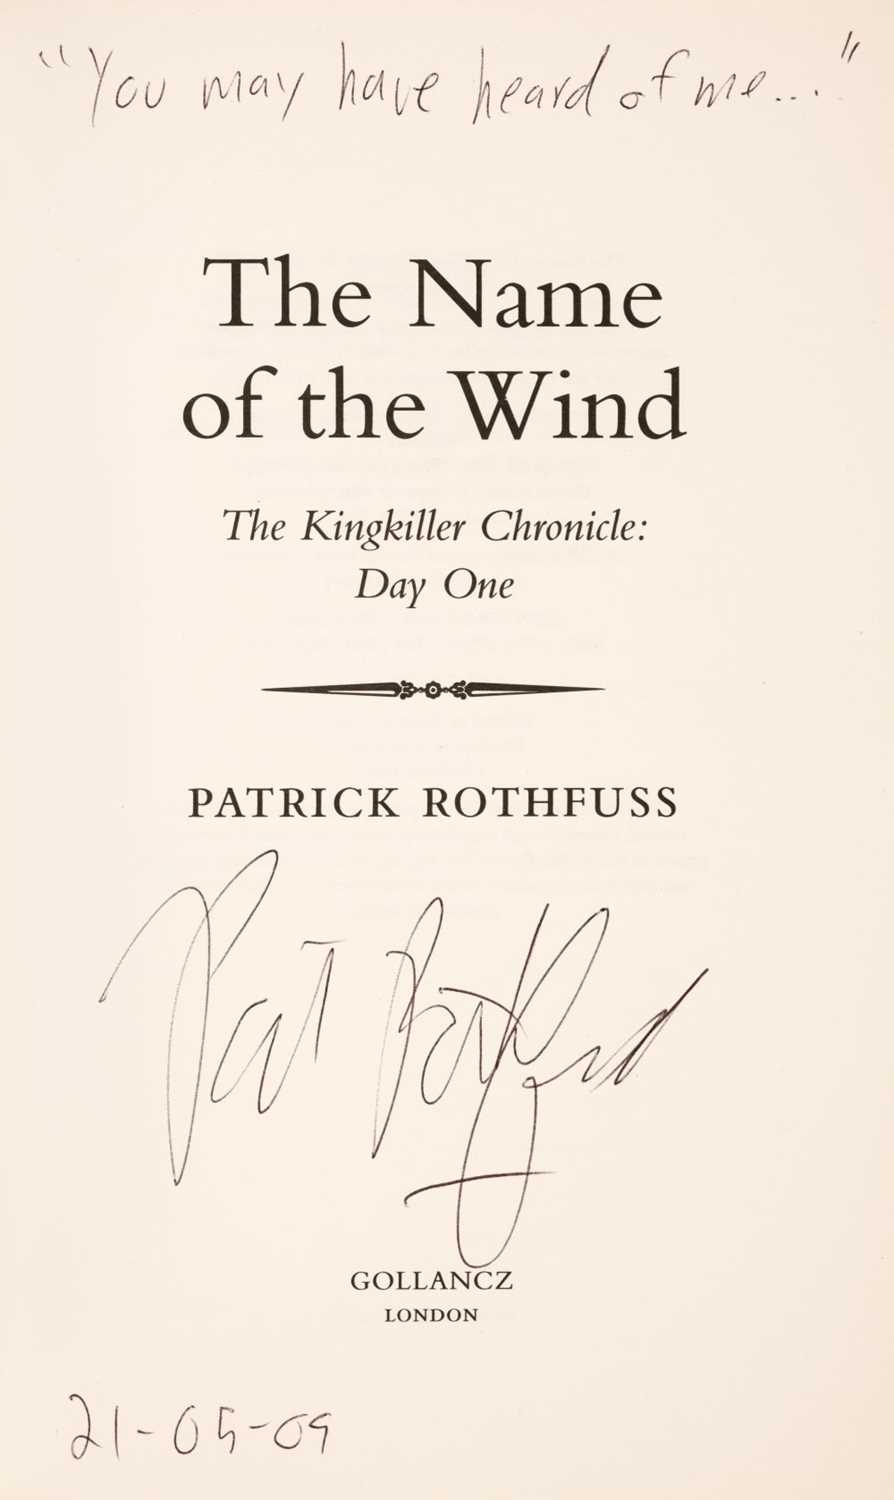 Lot 868 - Rothfuss (Patrick). The Name of the Wind, 1st edition, London: Gollancz, 2007